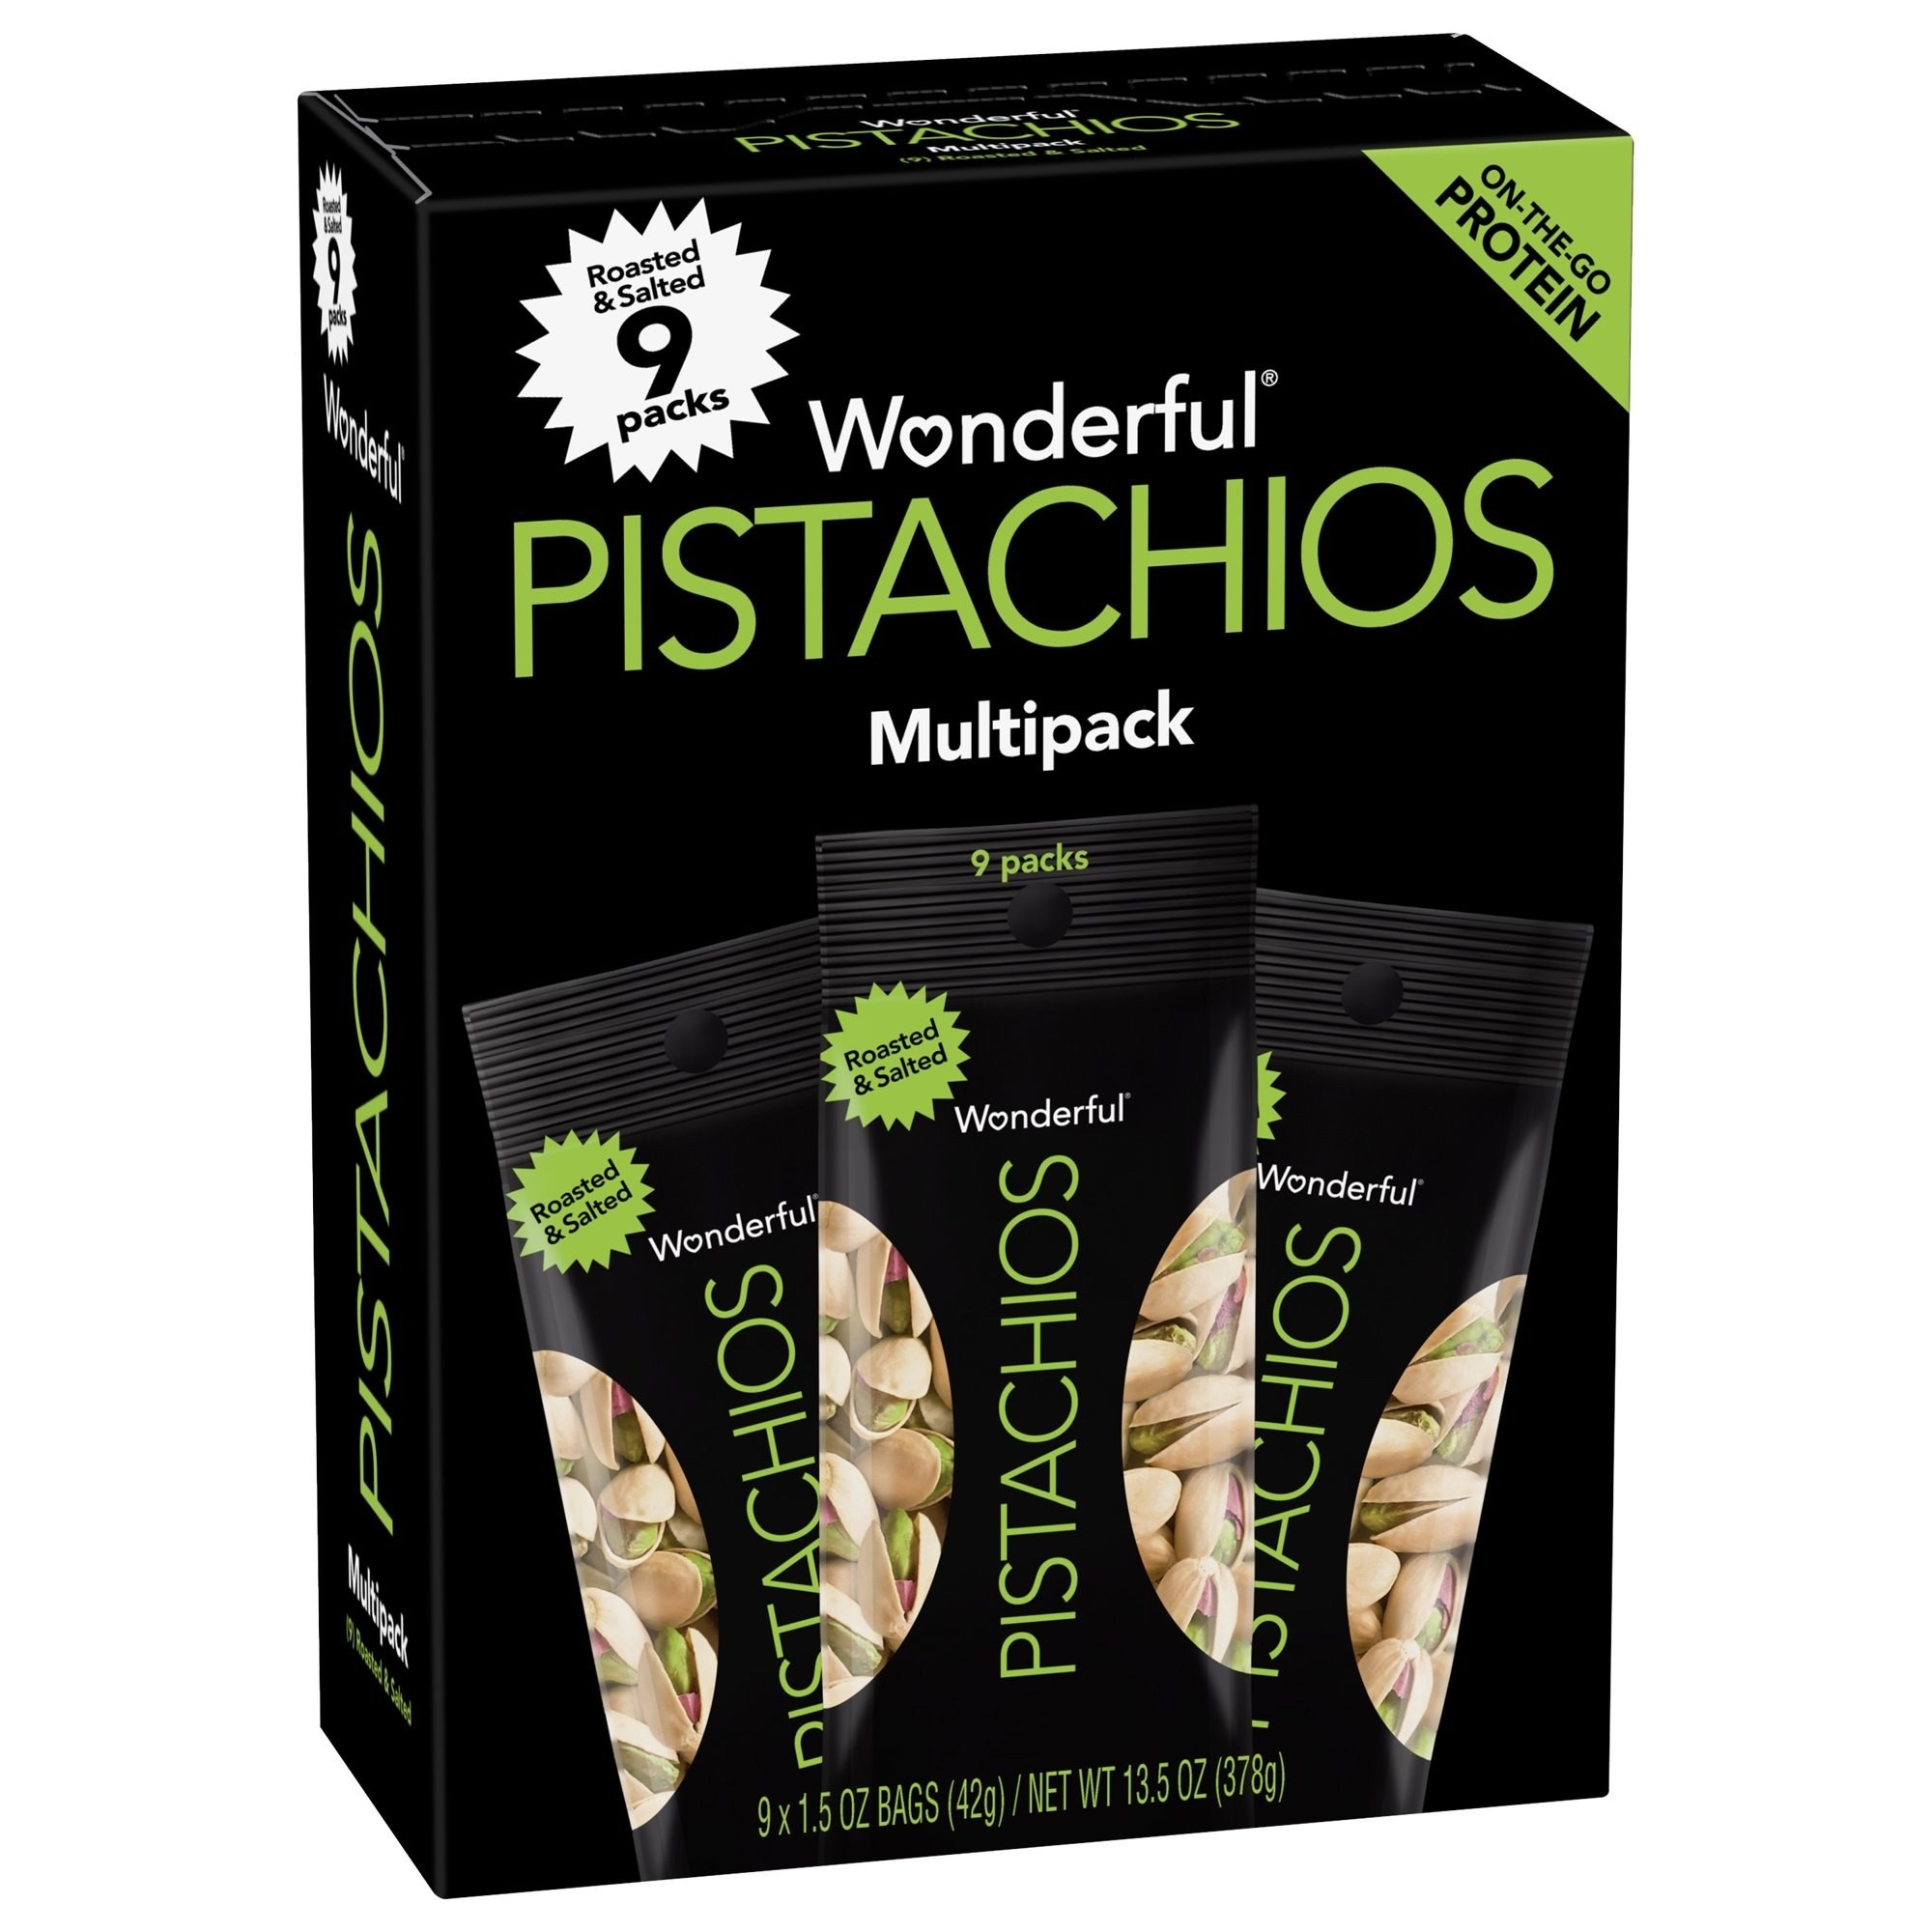 the pack of pistachios